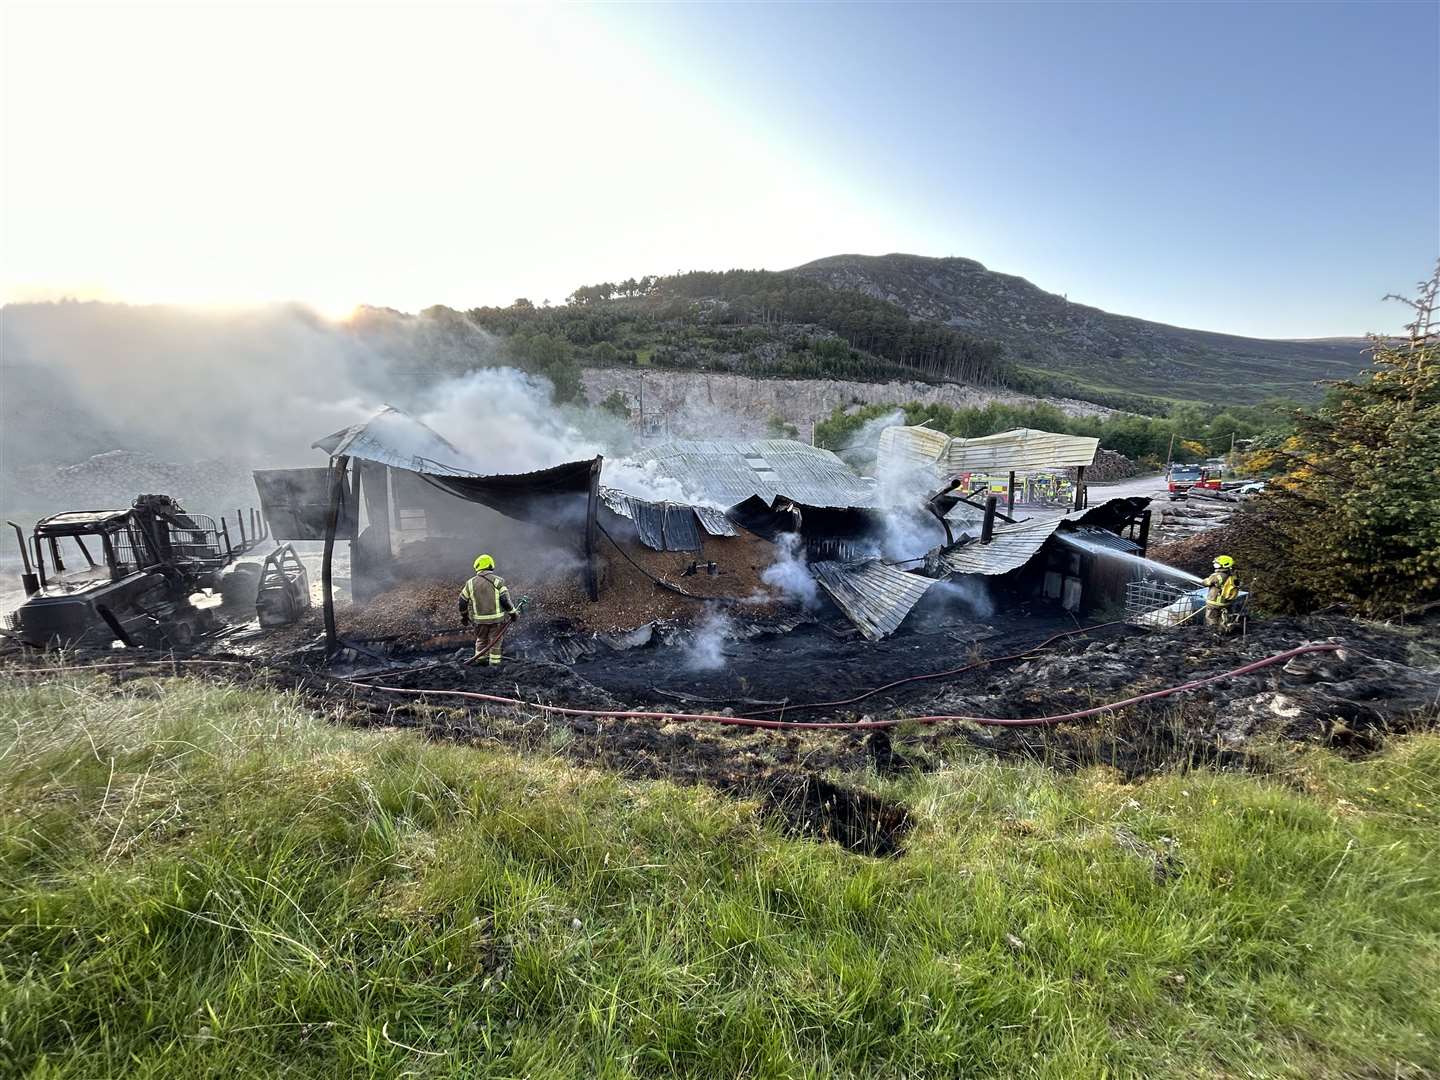 The shed was destroyed in some 20 minutes, taking with it expensive equipment and a solar panel installation on the roof. Picture: Hannah MacGregor.